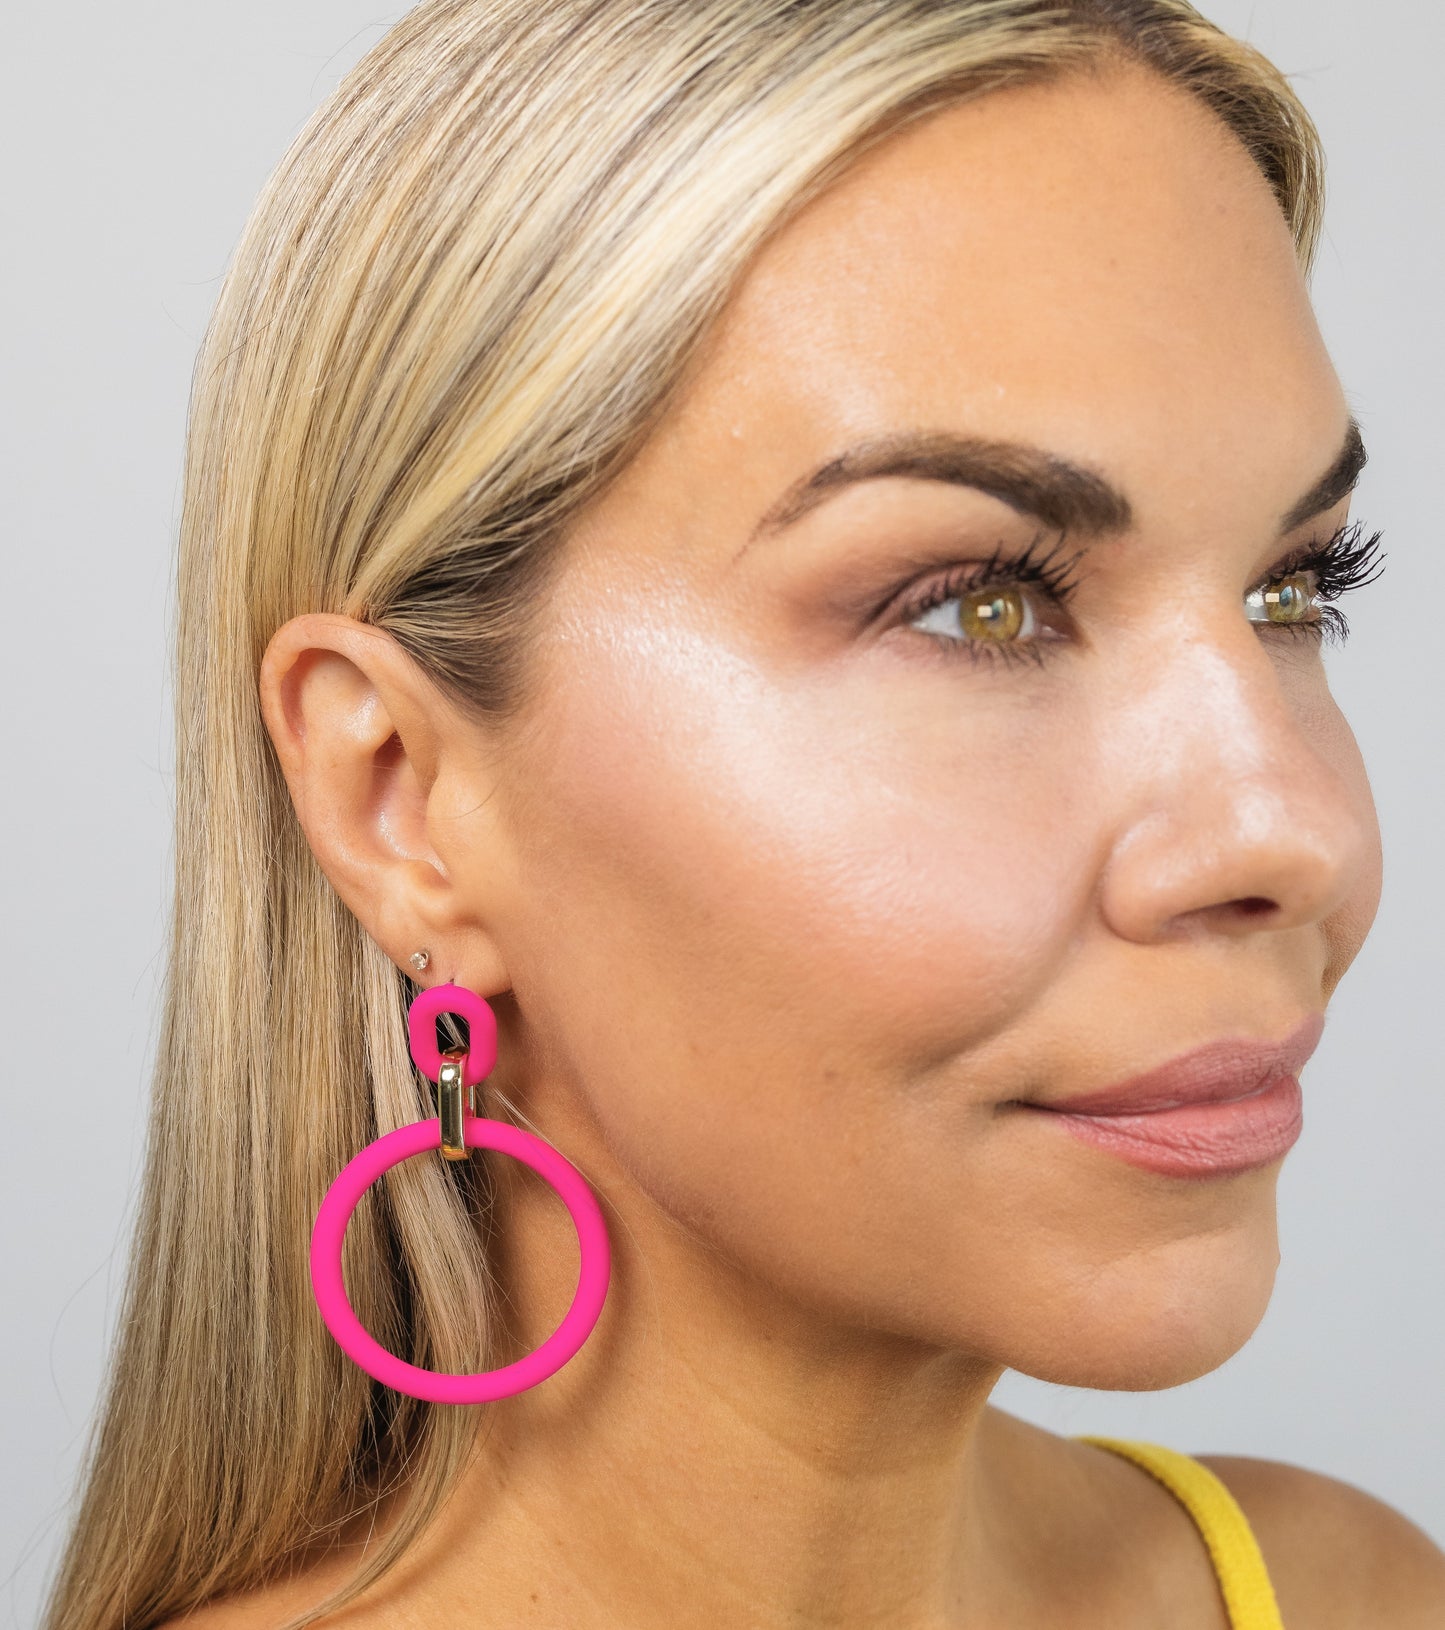 Purrr Pink Panther Earring